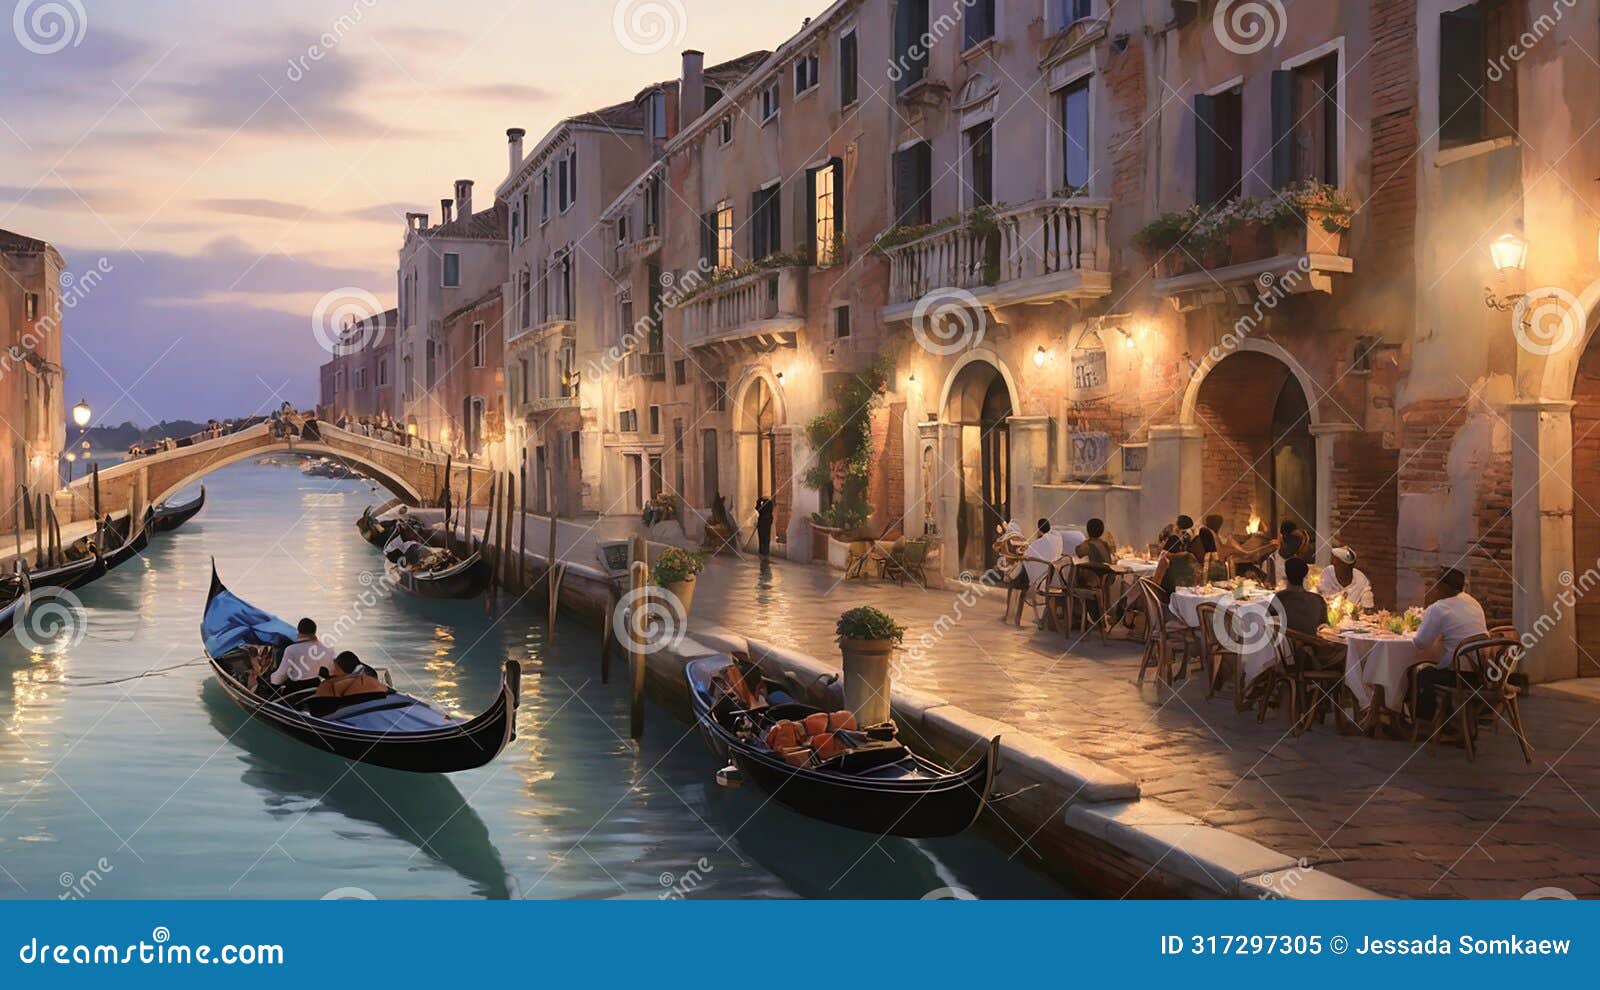 oil painting: a serene venetian canal at twilight, with gondolas gliding beneath a stone bridge, ornate palazzos lining the water